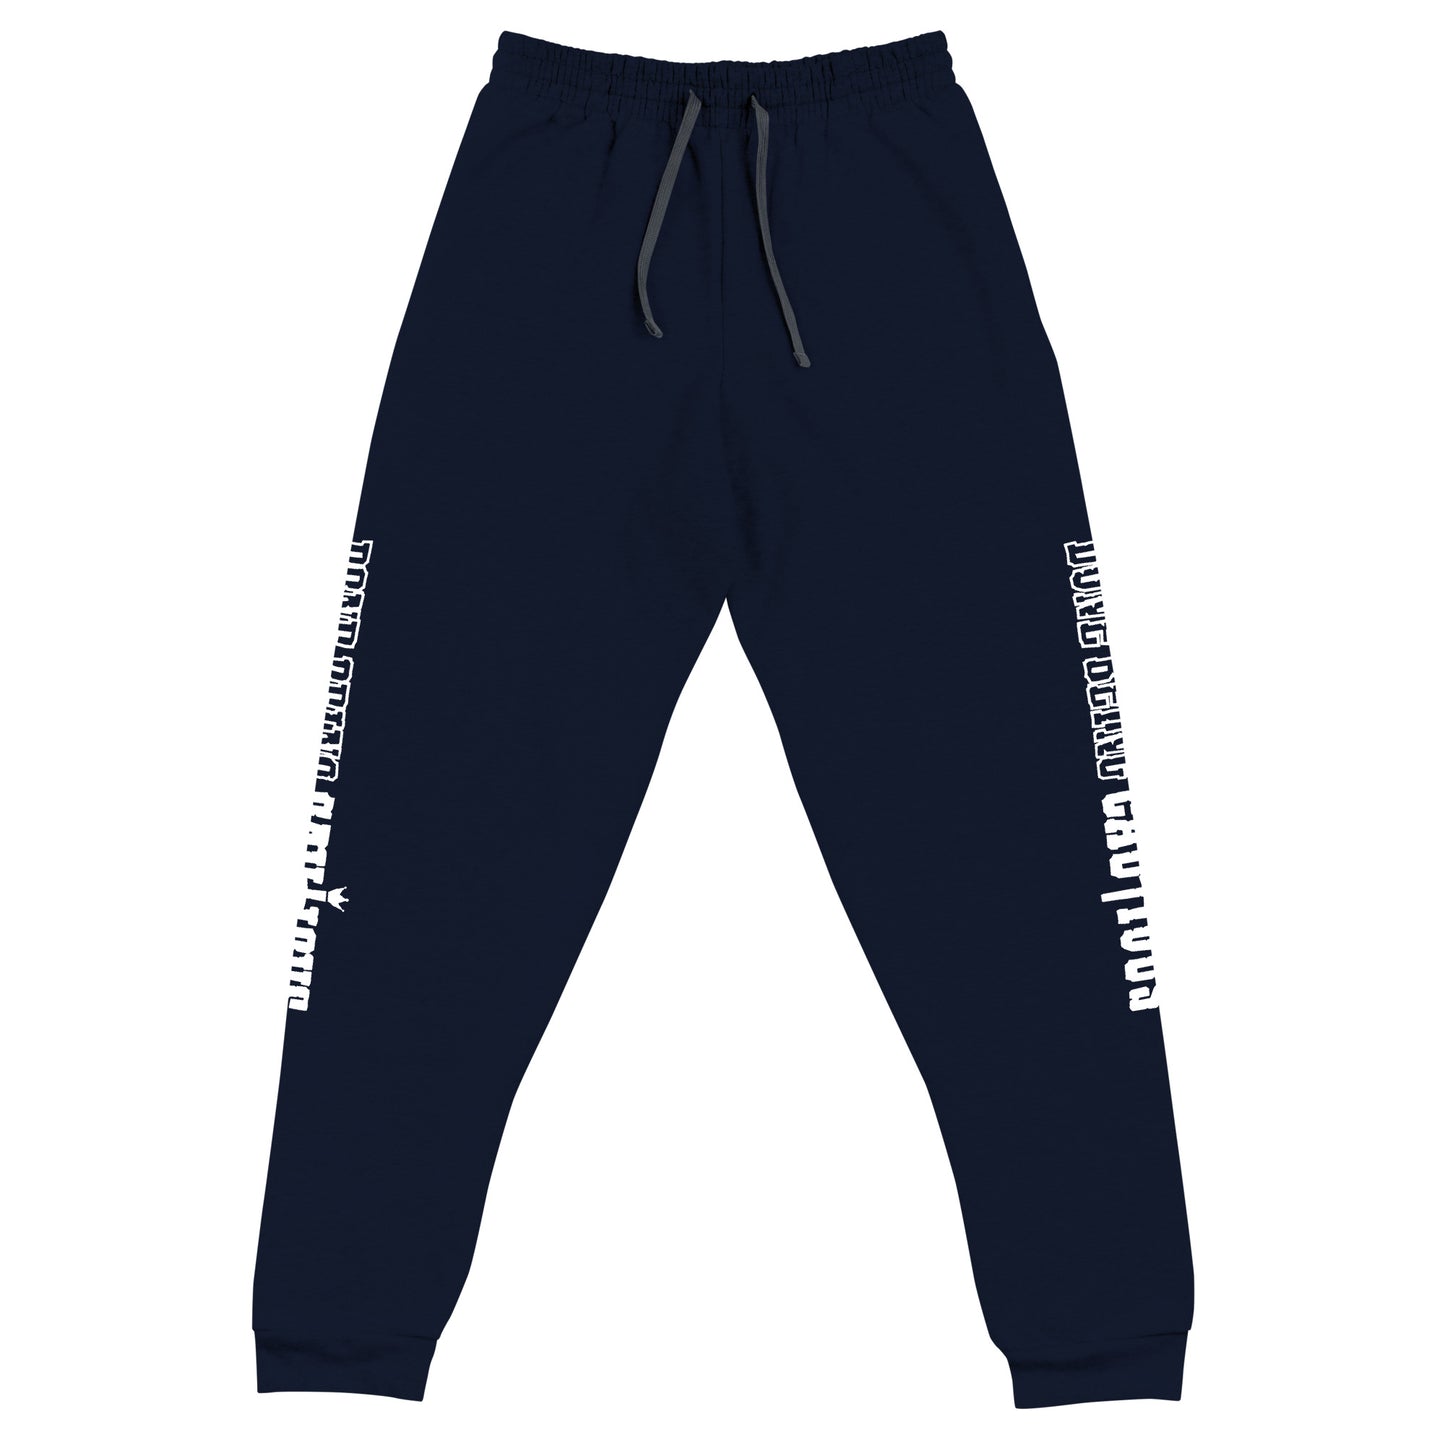 Done Being Cautious Signature Monotone Joggers (3 colors)